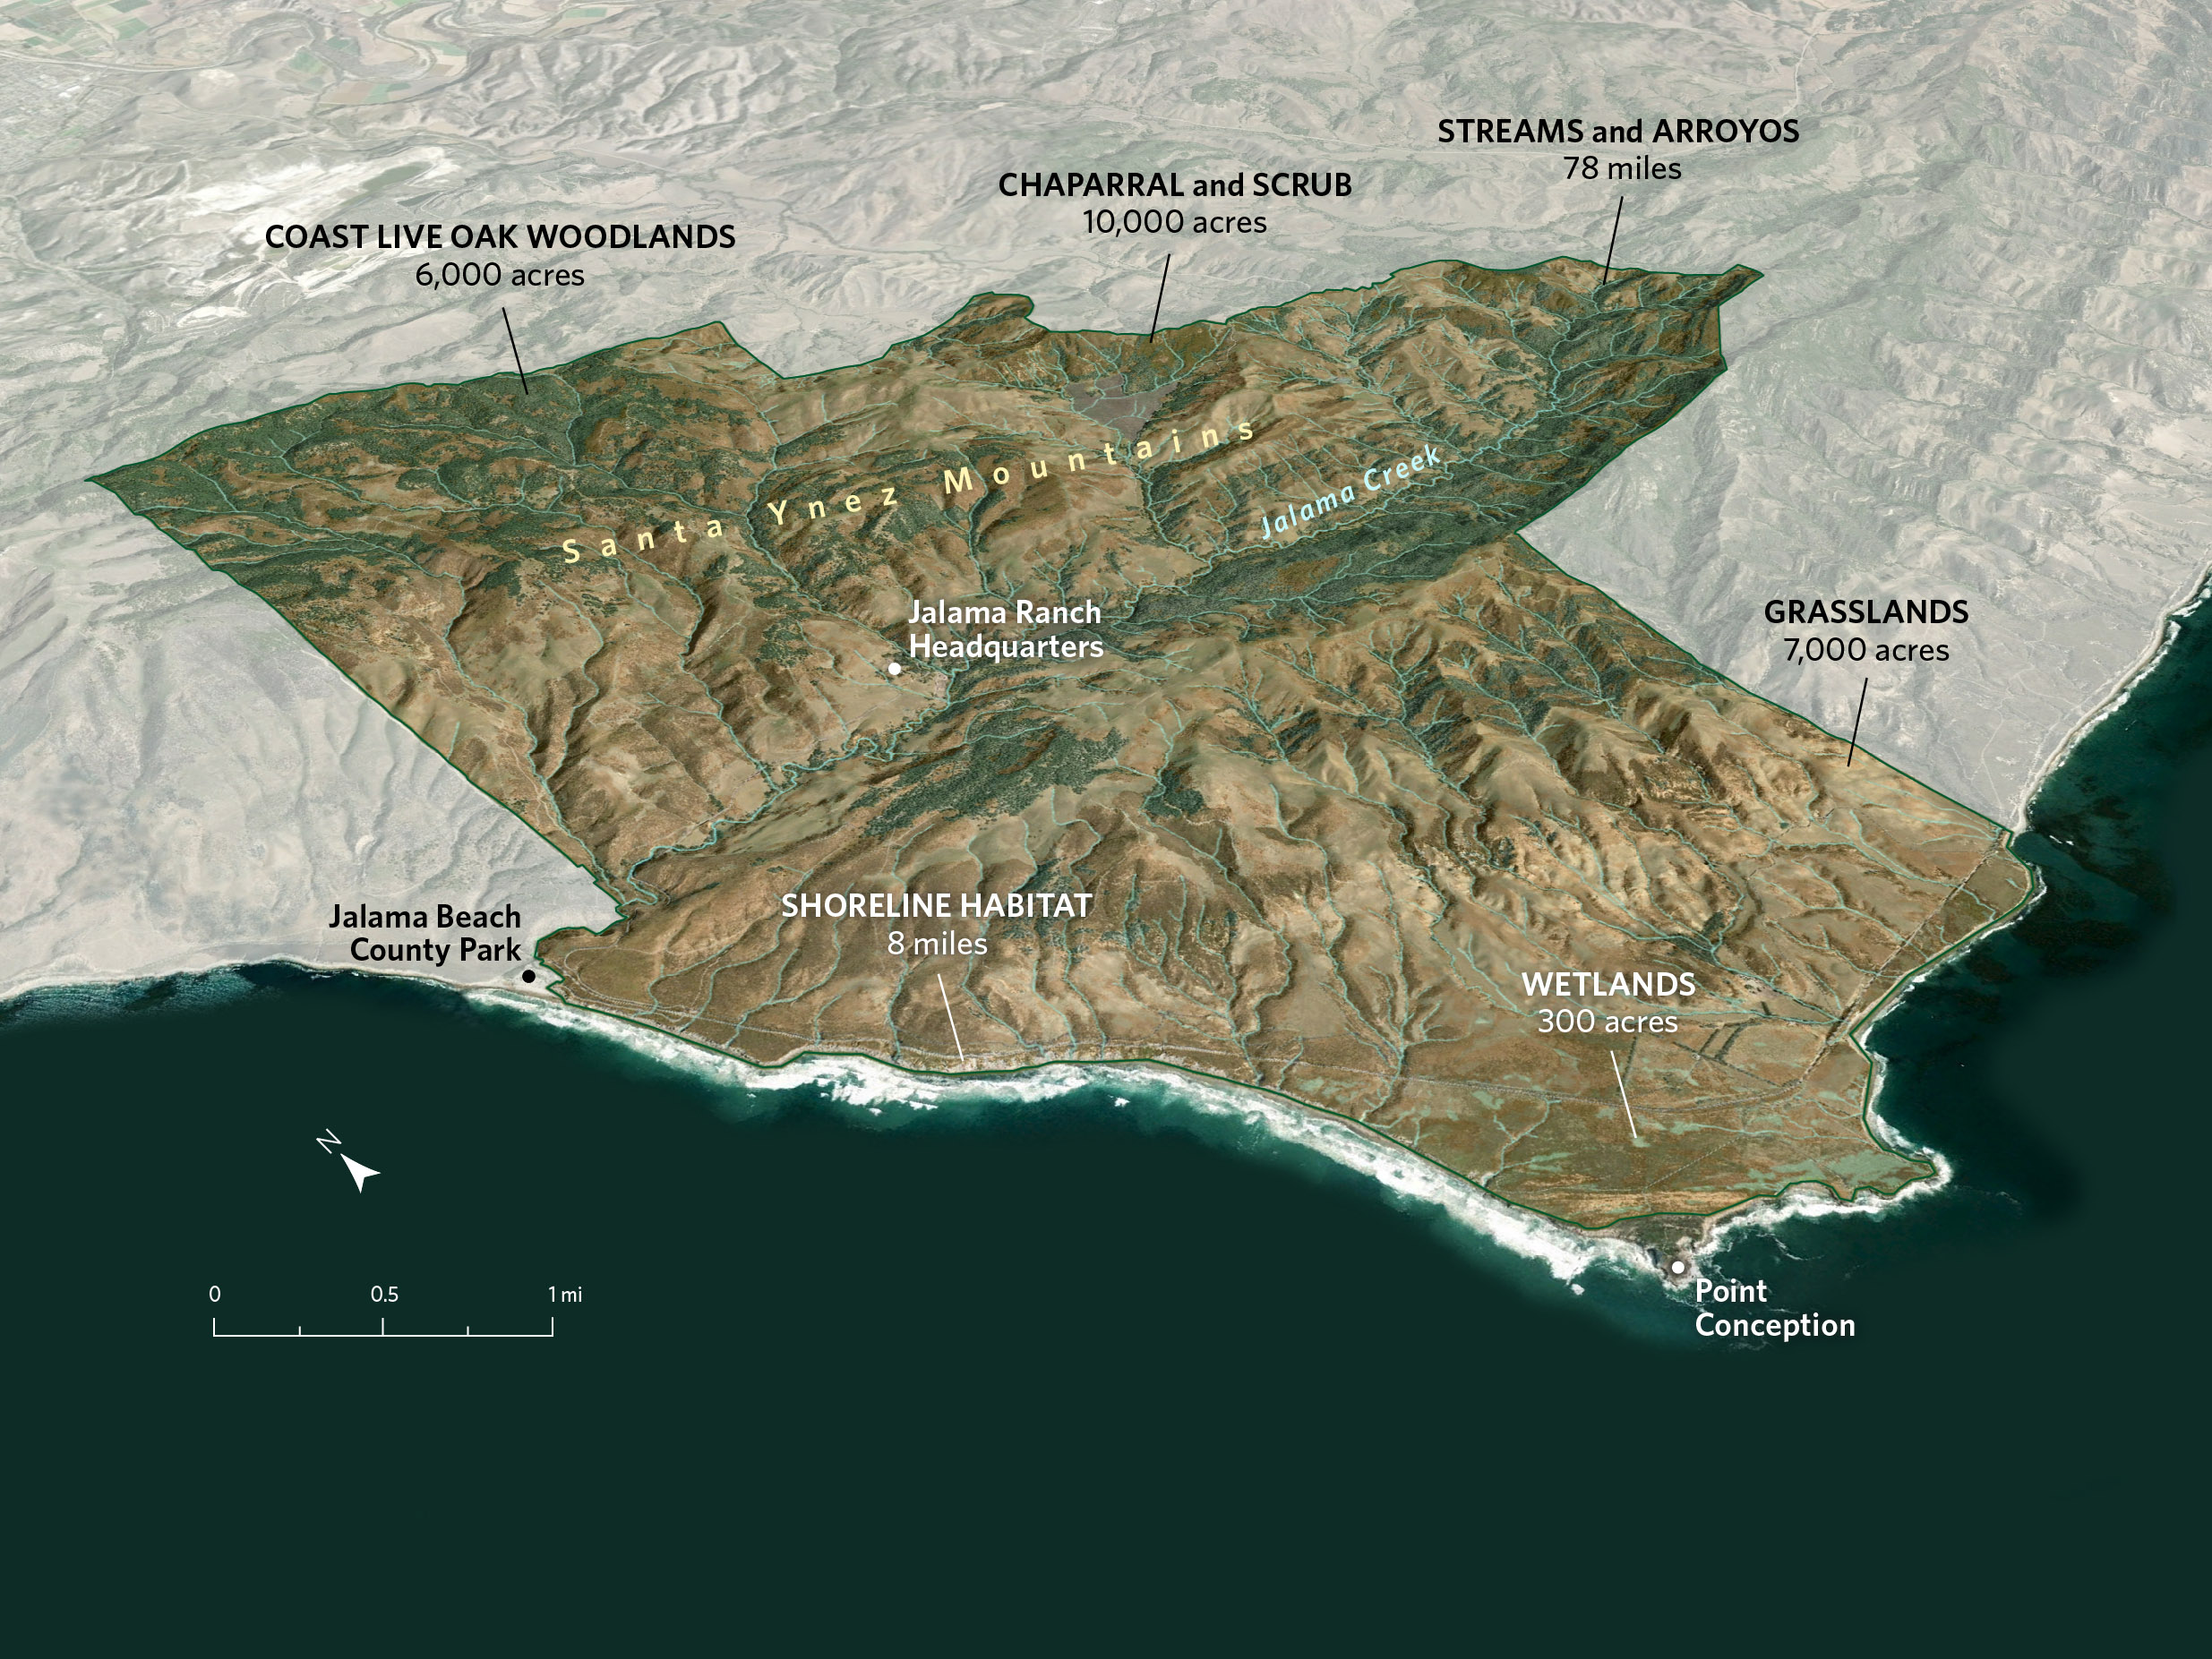 Topography of Dangermond Preserve in California with points indicating locations of various habitats within the preserve.